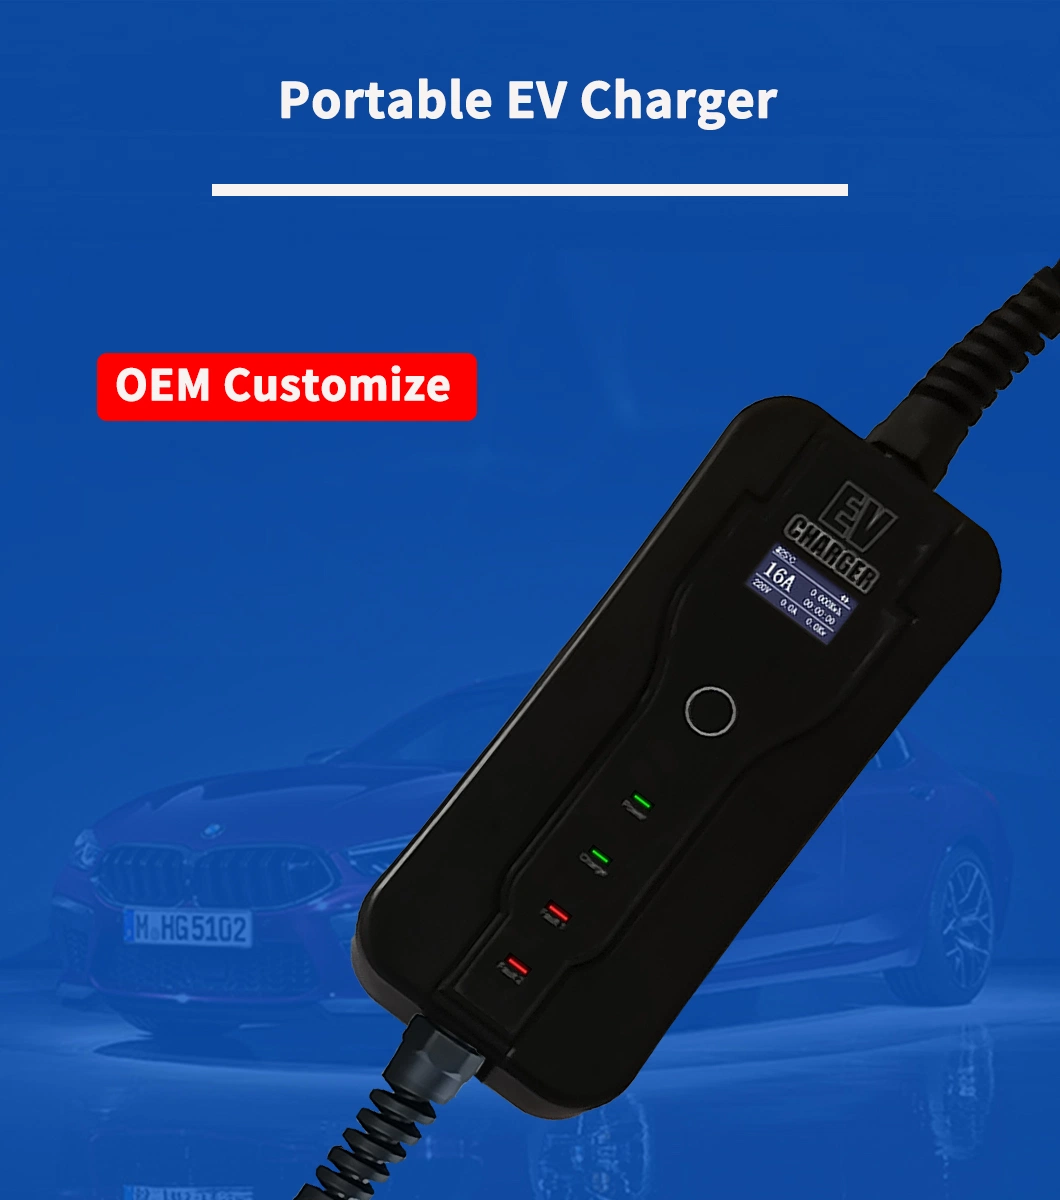 7kw 3.5kw 16A 32A SAE J1772 CE Approved Chinese EV Charger Portable EV Car Charging Station Type1 Indicator Light Electrics Car Charger